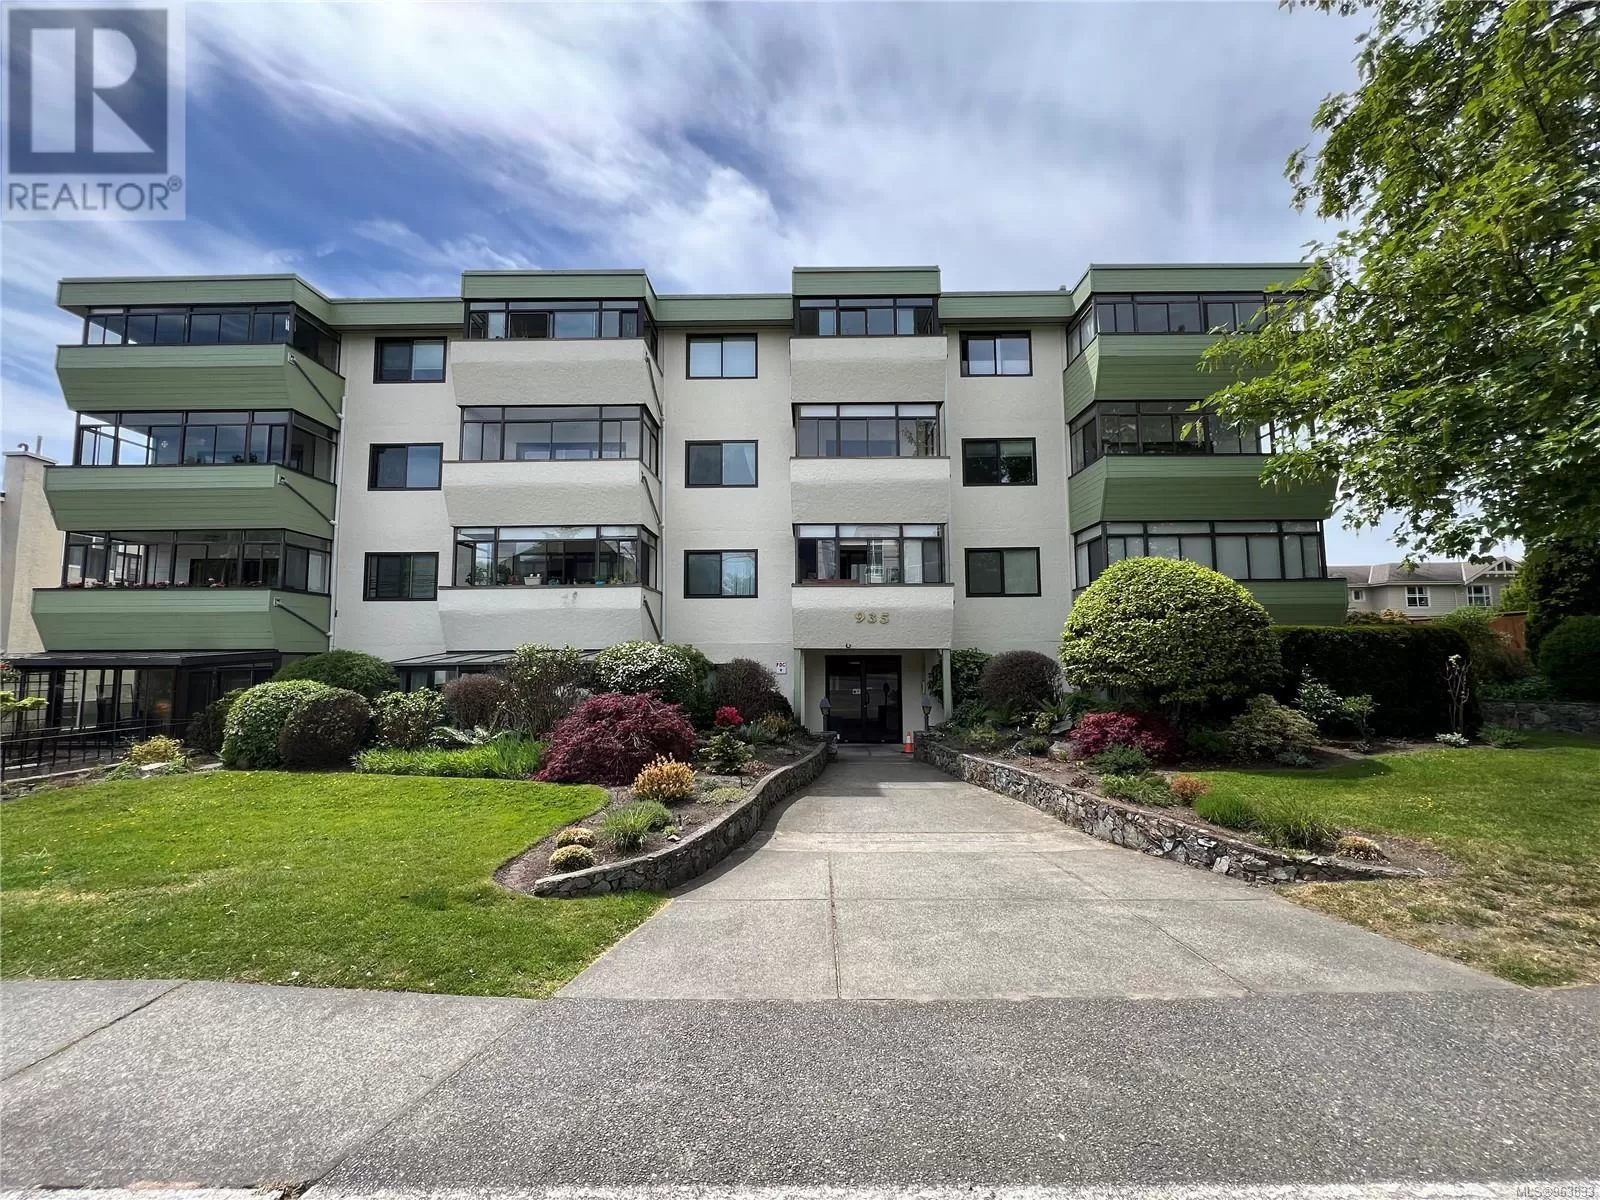 Apartment for rent: 301 935 Fairfield Rd, Victoria, British Columbia V8V 3A3